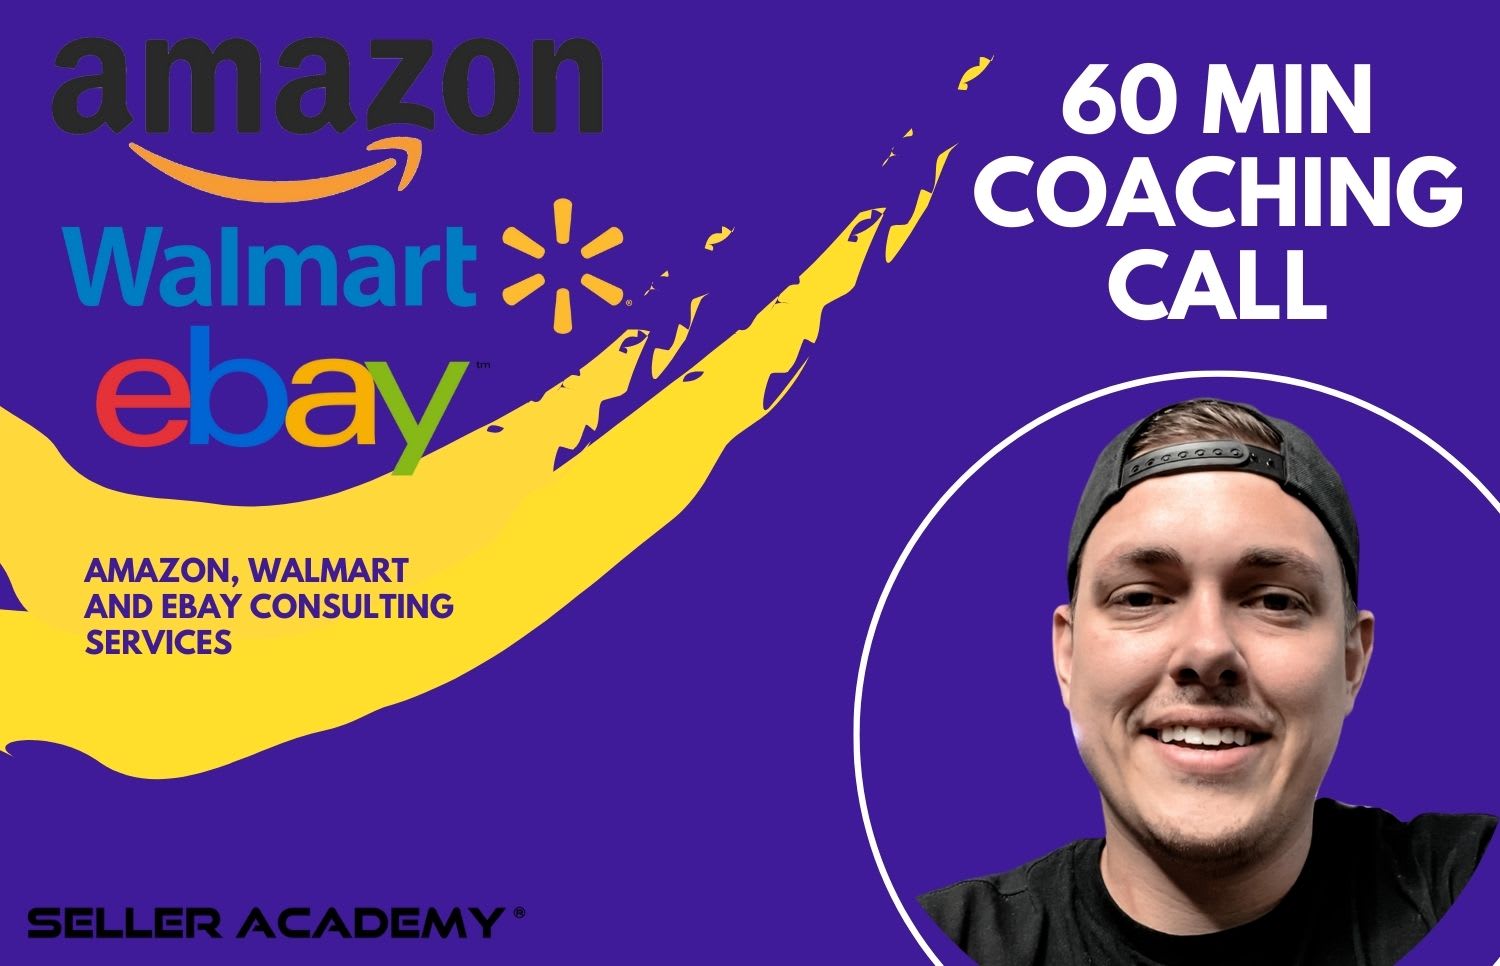 Coach you for 1 hr how to sell on amazon, walmart or ebay by Selleracademy  | Fiverr